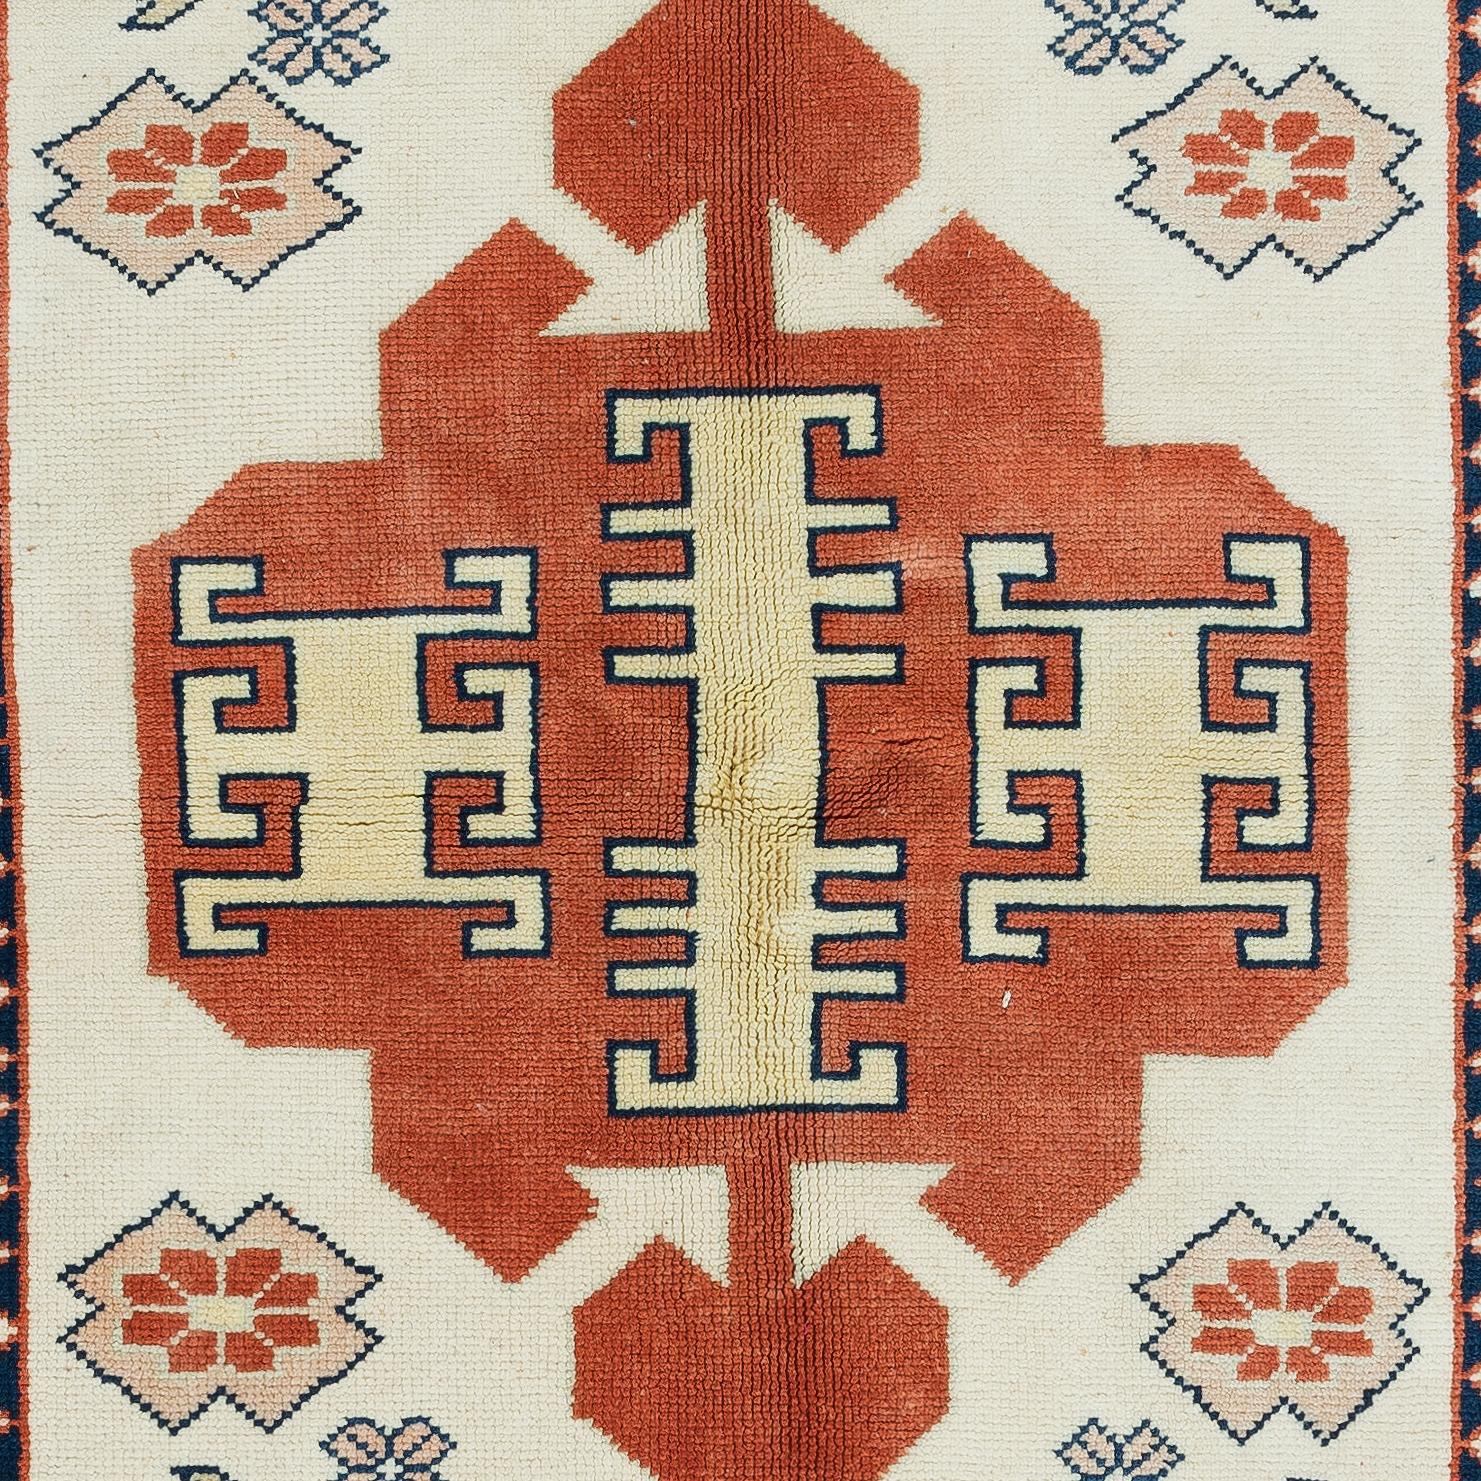 Hand-Knotted 4x5.6 Ft Vintage Handmade Geometric Turkish Rug in Cream, Red and Blue Colors For Sale